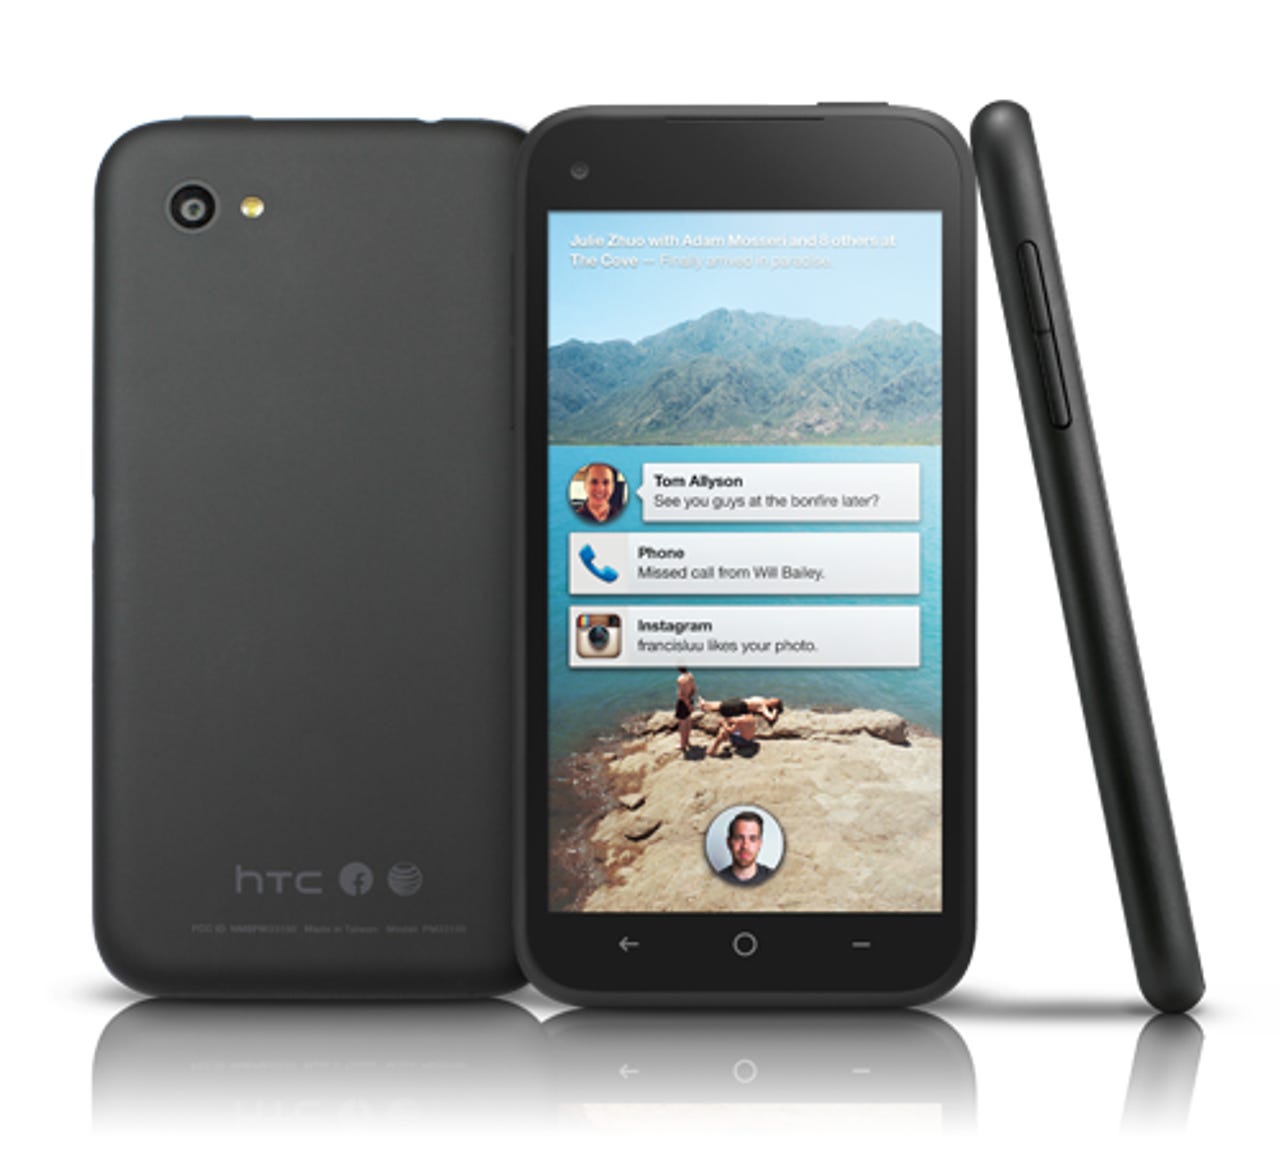 htc-first-slide-01.png